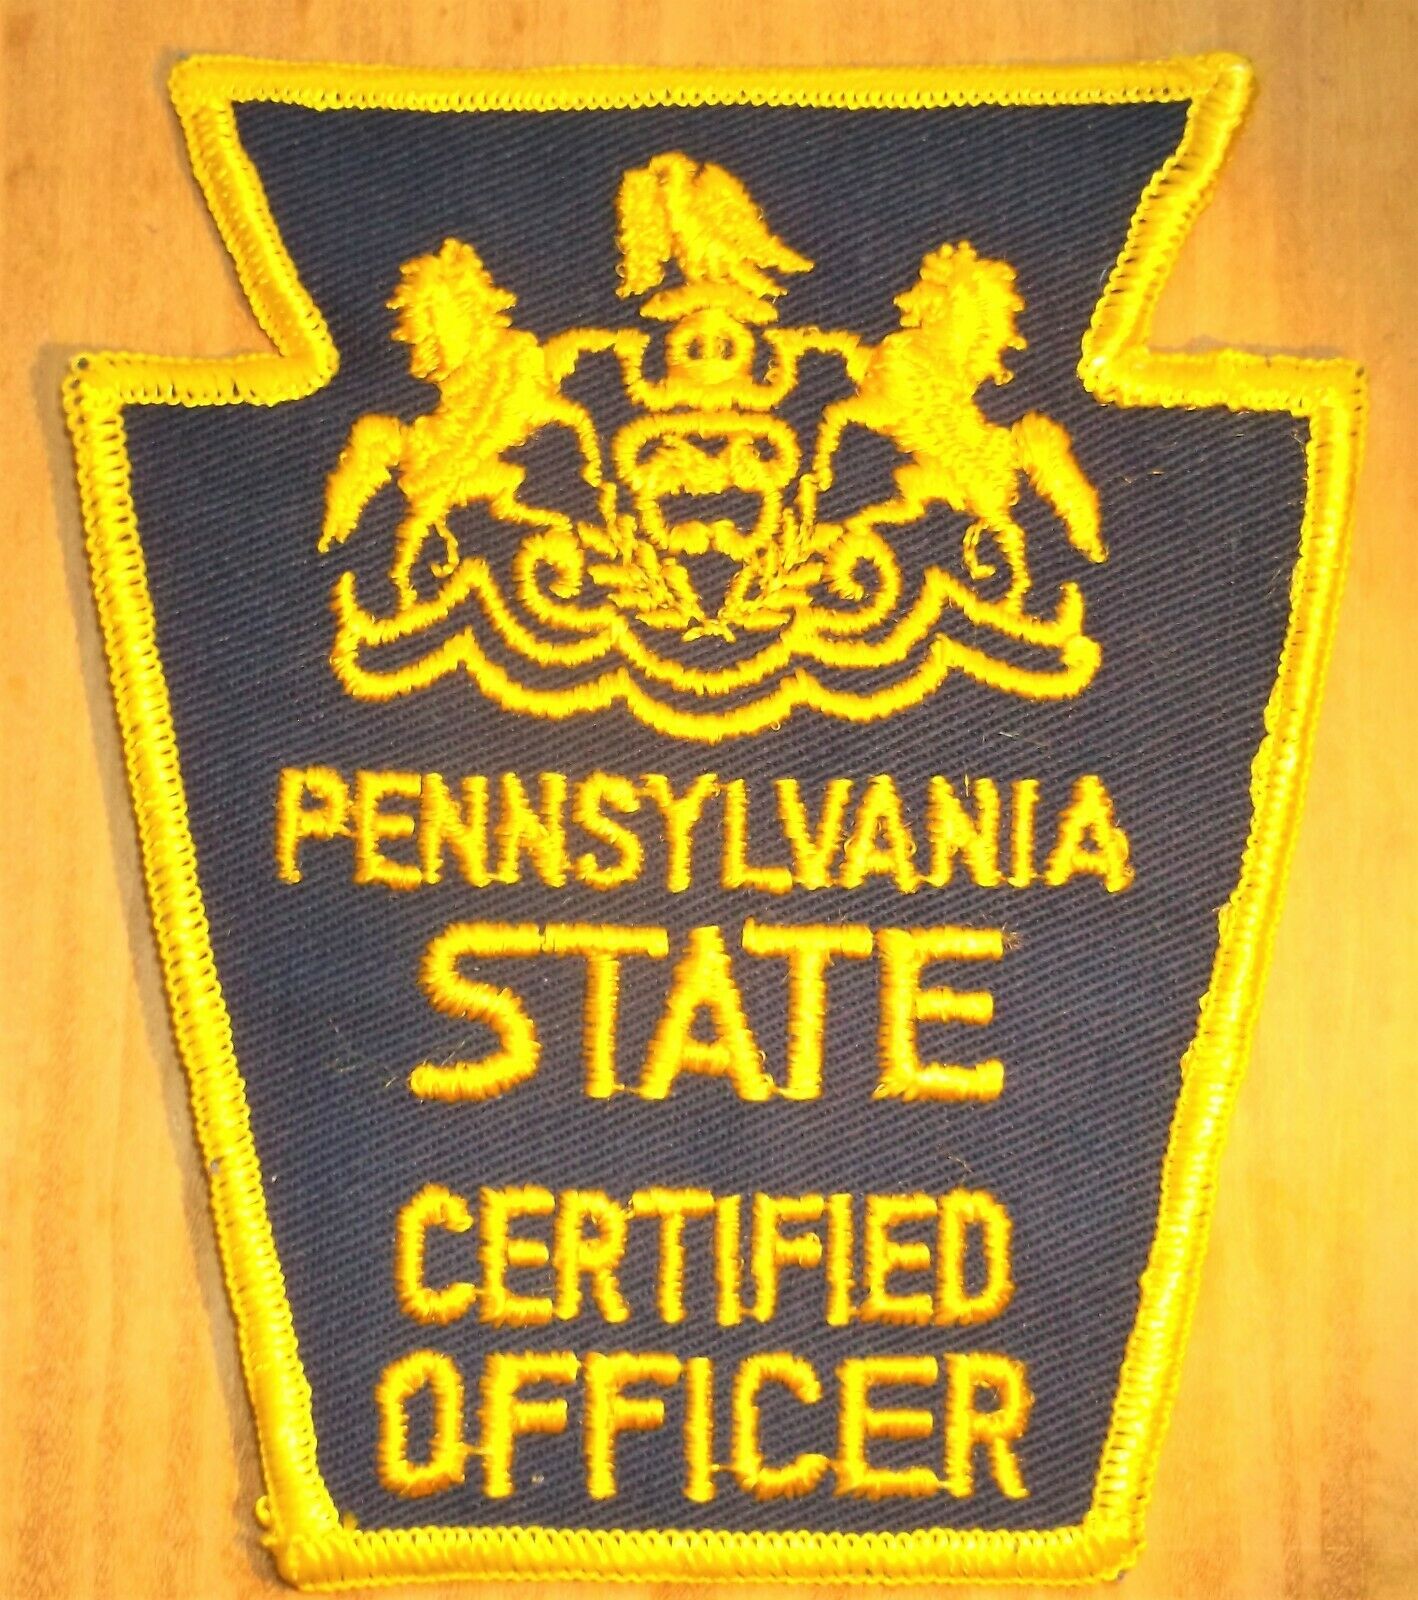 Gemsco Nos Vintage Collectible Patch State Certified Officer Pa -  Original 45+